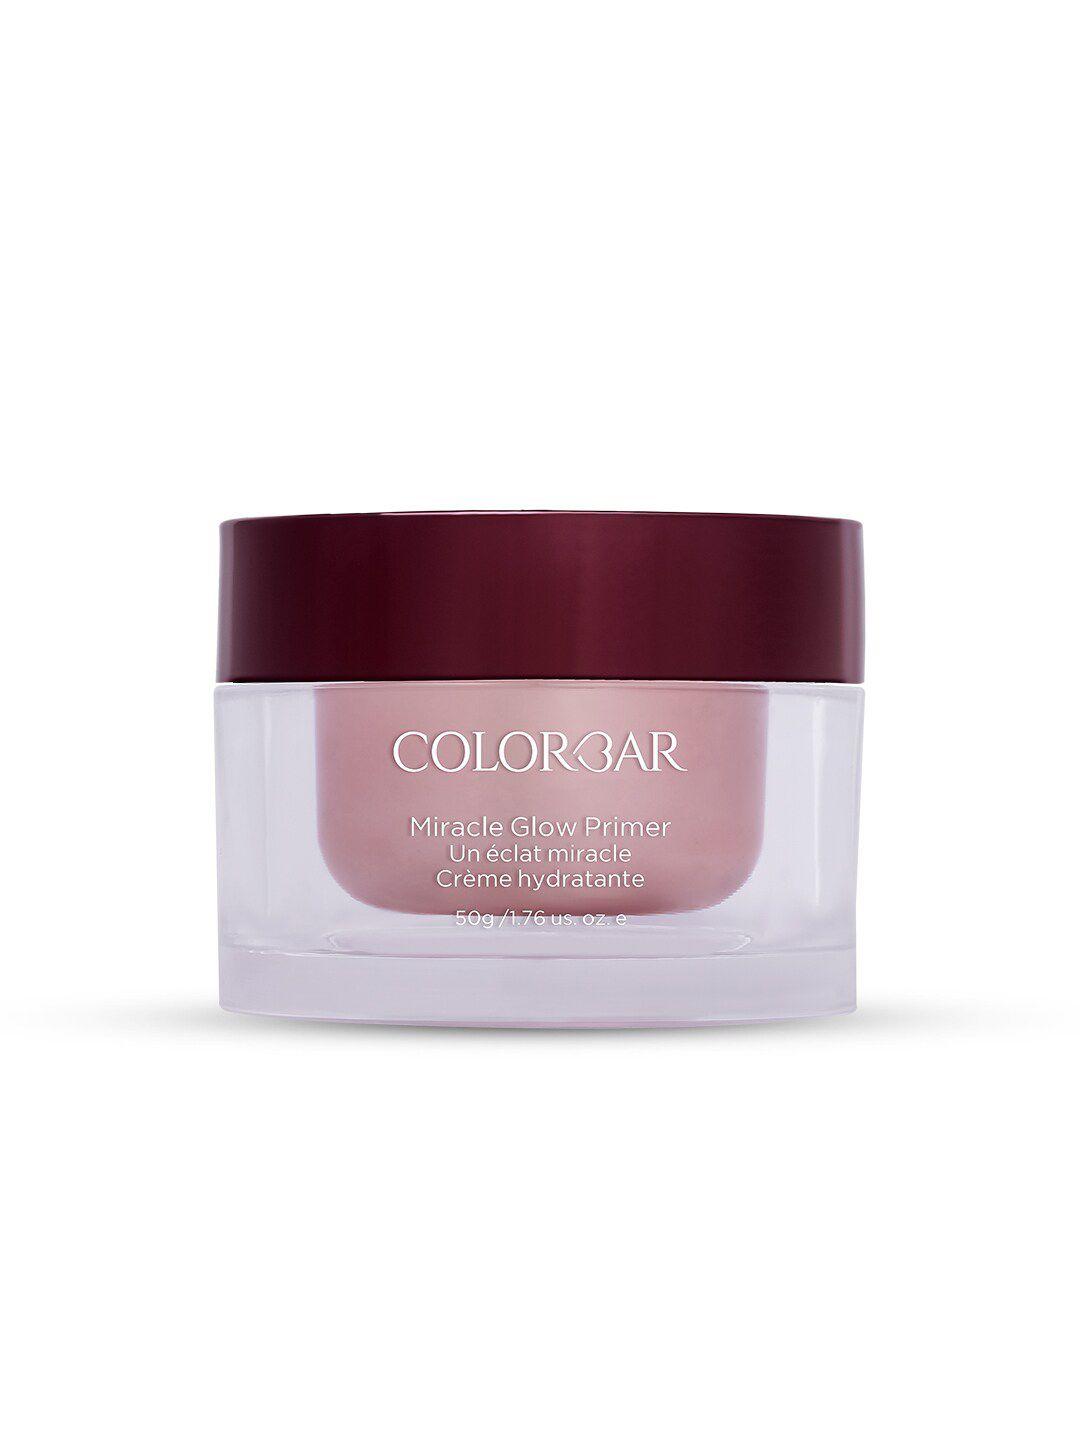 colorbar miracle glow primer with camellia oil & hyaluronic acid - 001